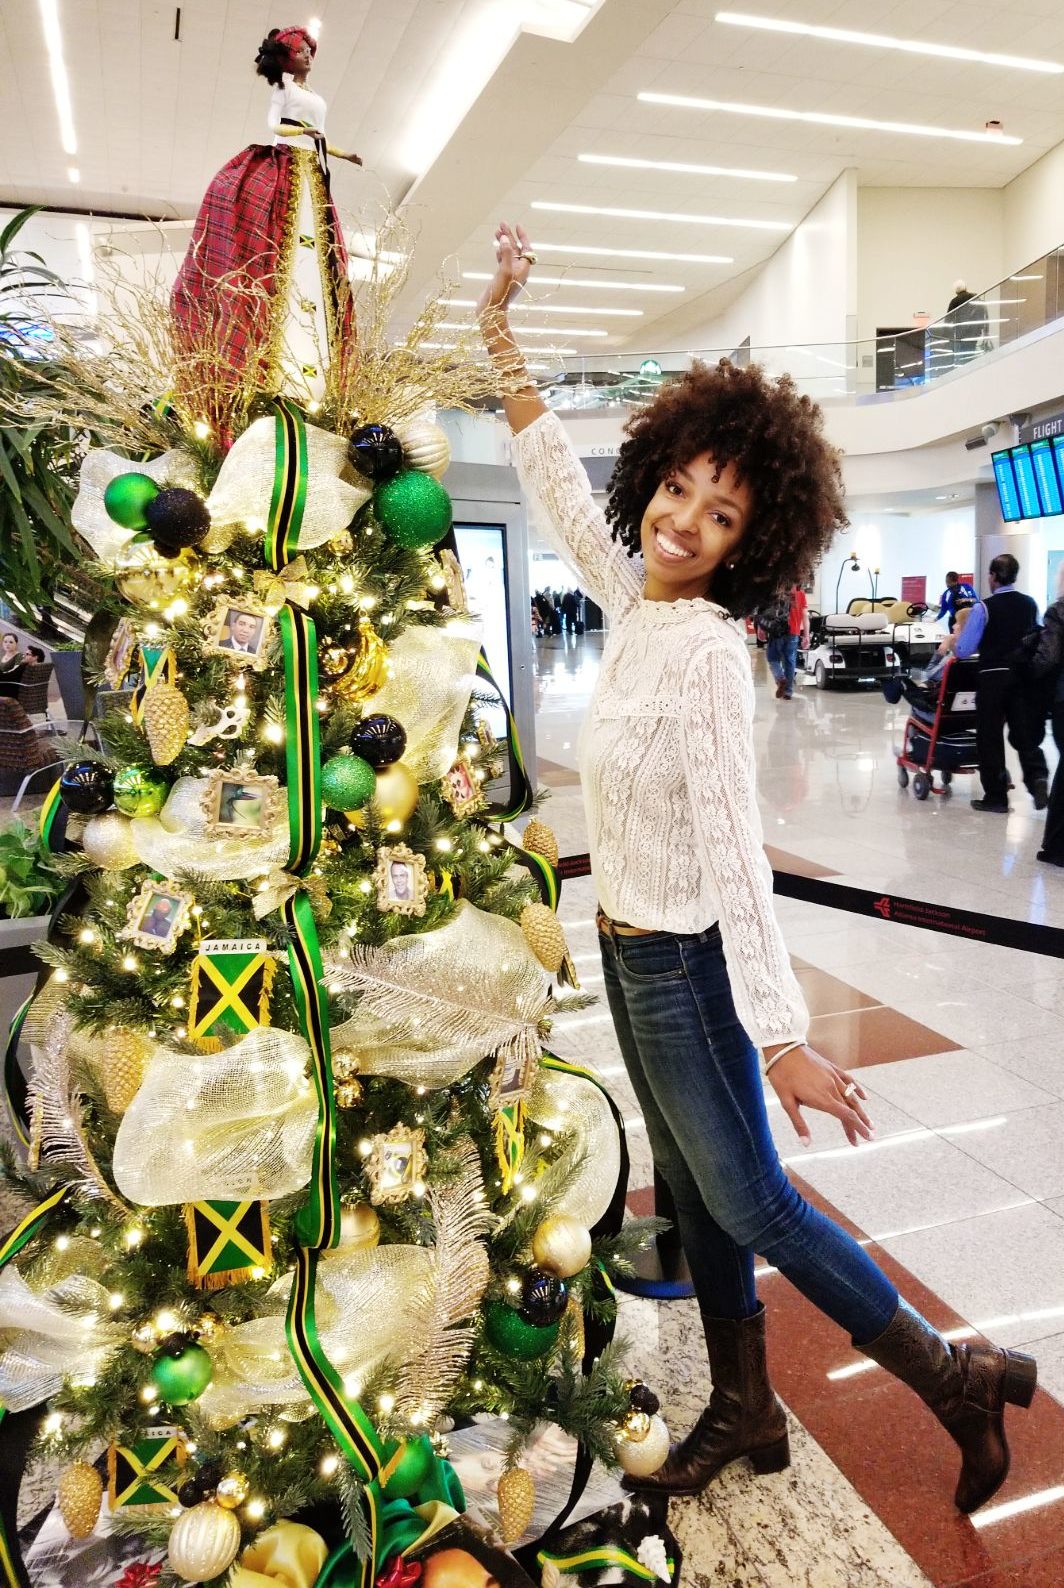 DECORATING THE JAMAICAN CHRISTMAS TREE FOR HARTSFIELD JACKSON INT'L - GLOBAL WINTER ...